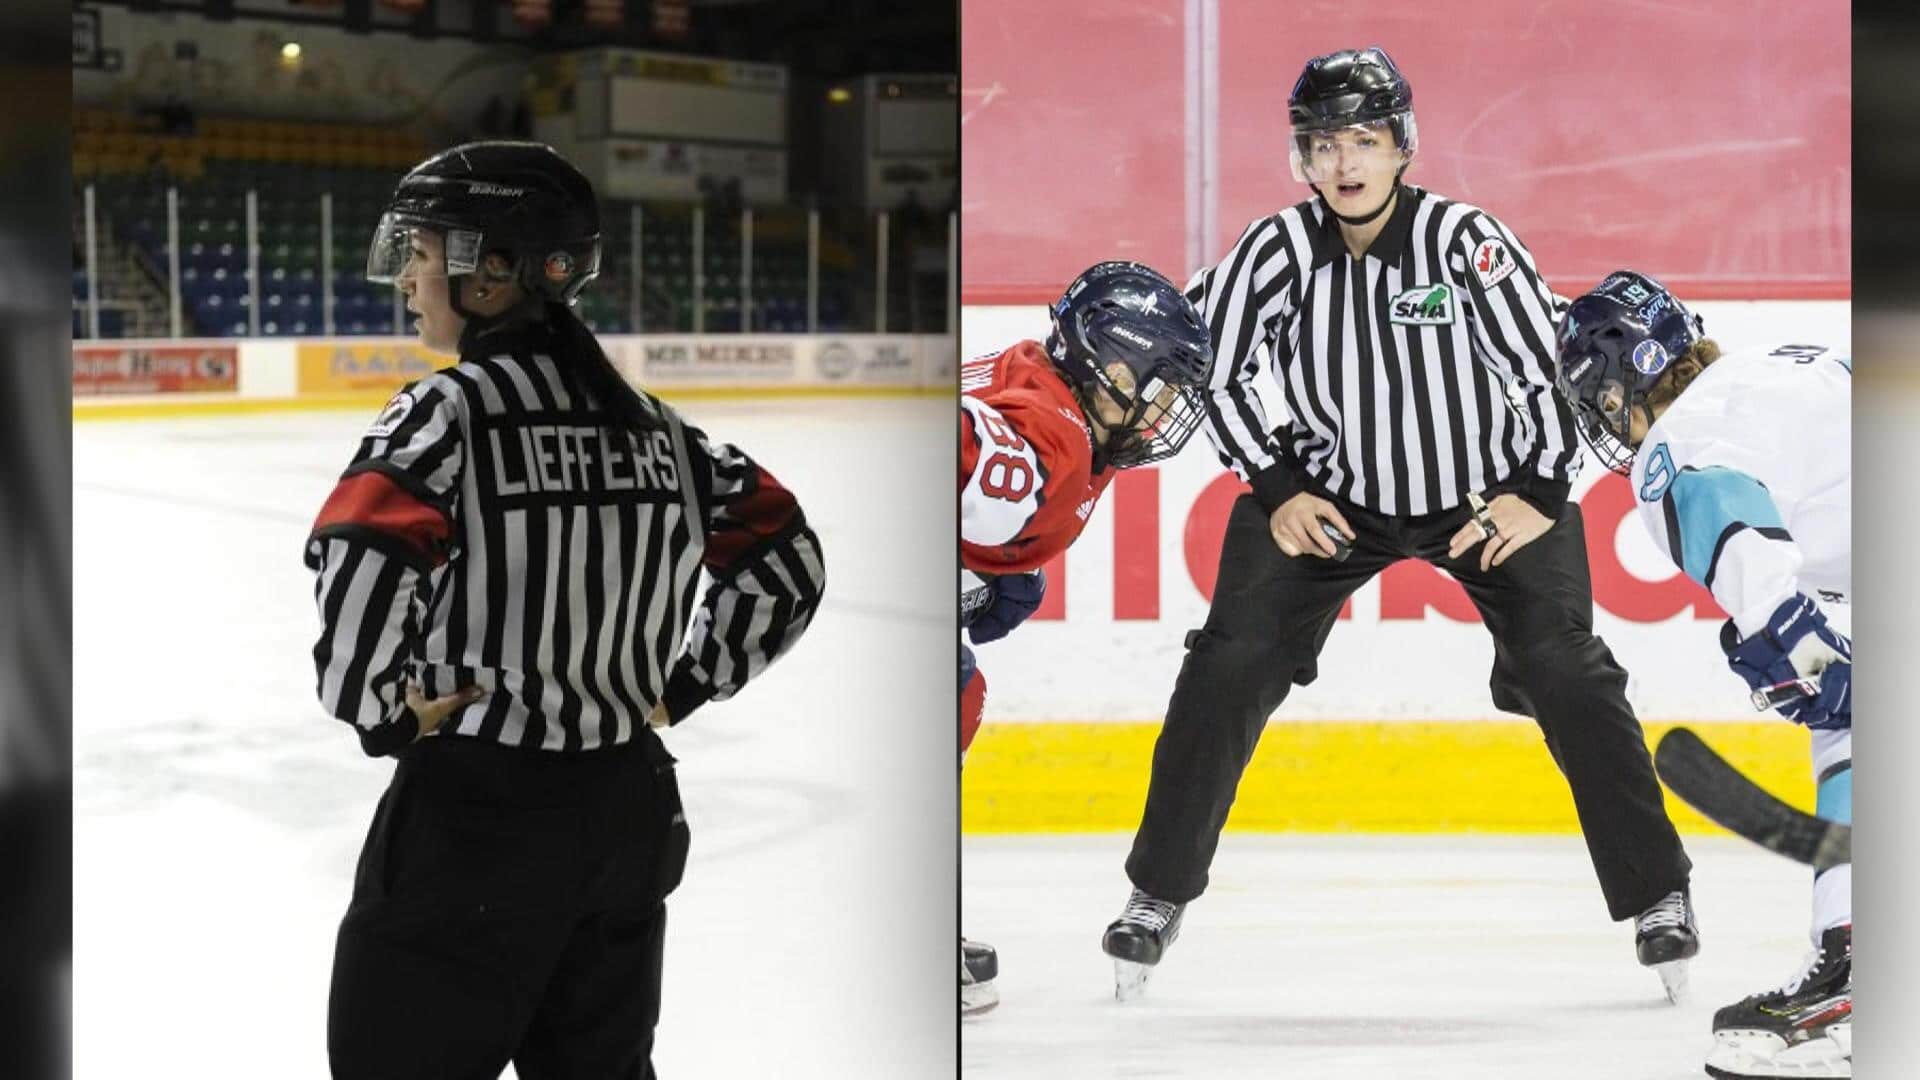 Featured image for “2 Saskatchewan referees earn their stripes at Women’s World Hockey Championship”